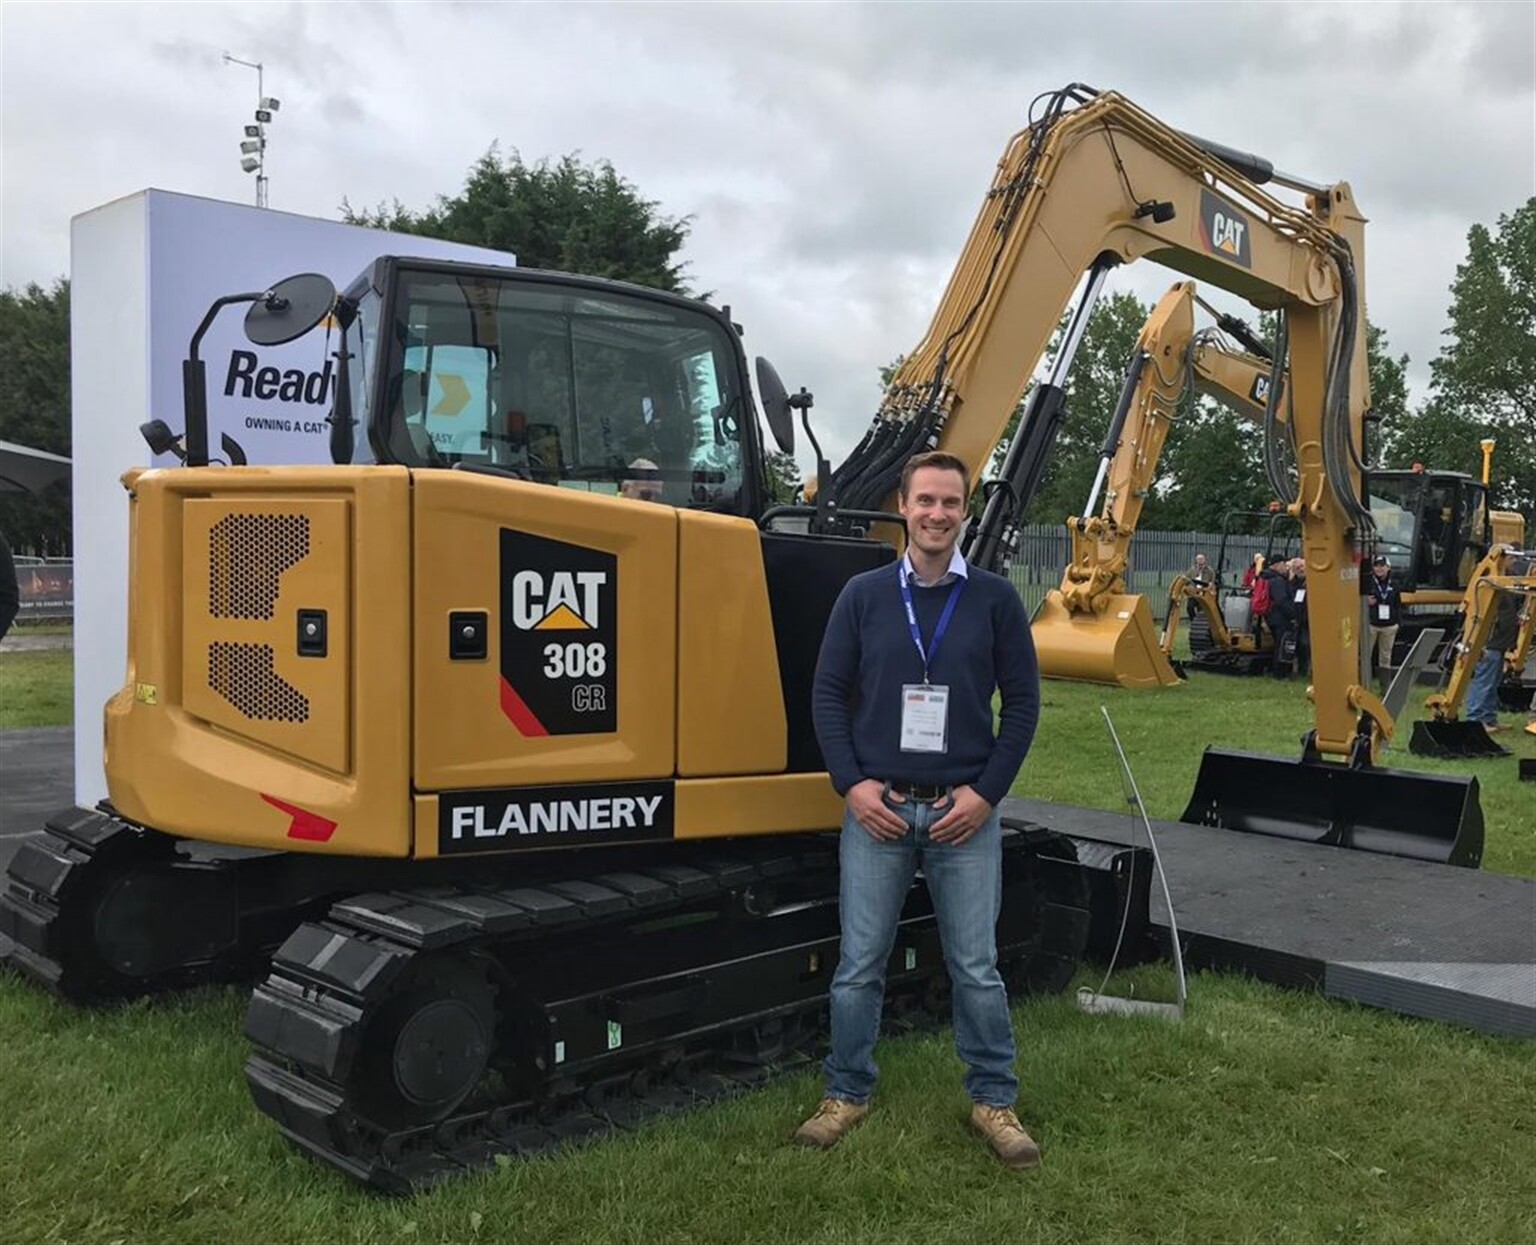 Multi-Million Pound Deal for Finning as Flannery adds Next Gen Excavators to the Fleet